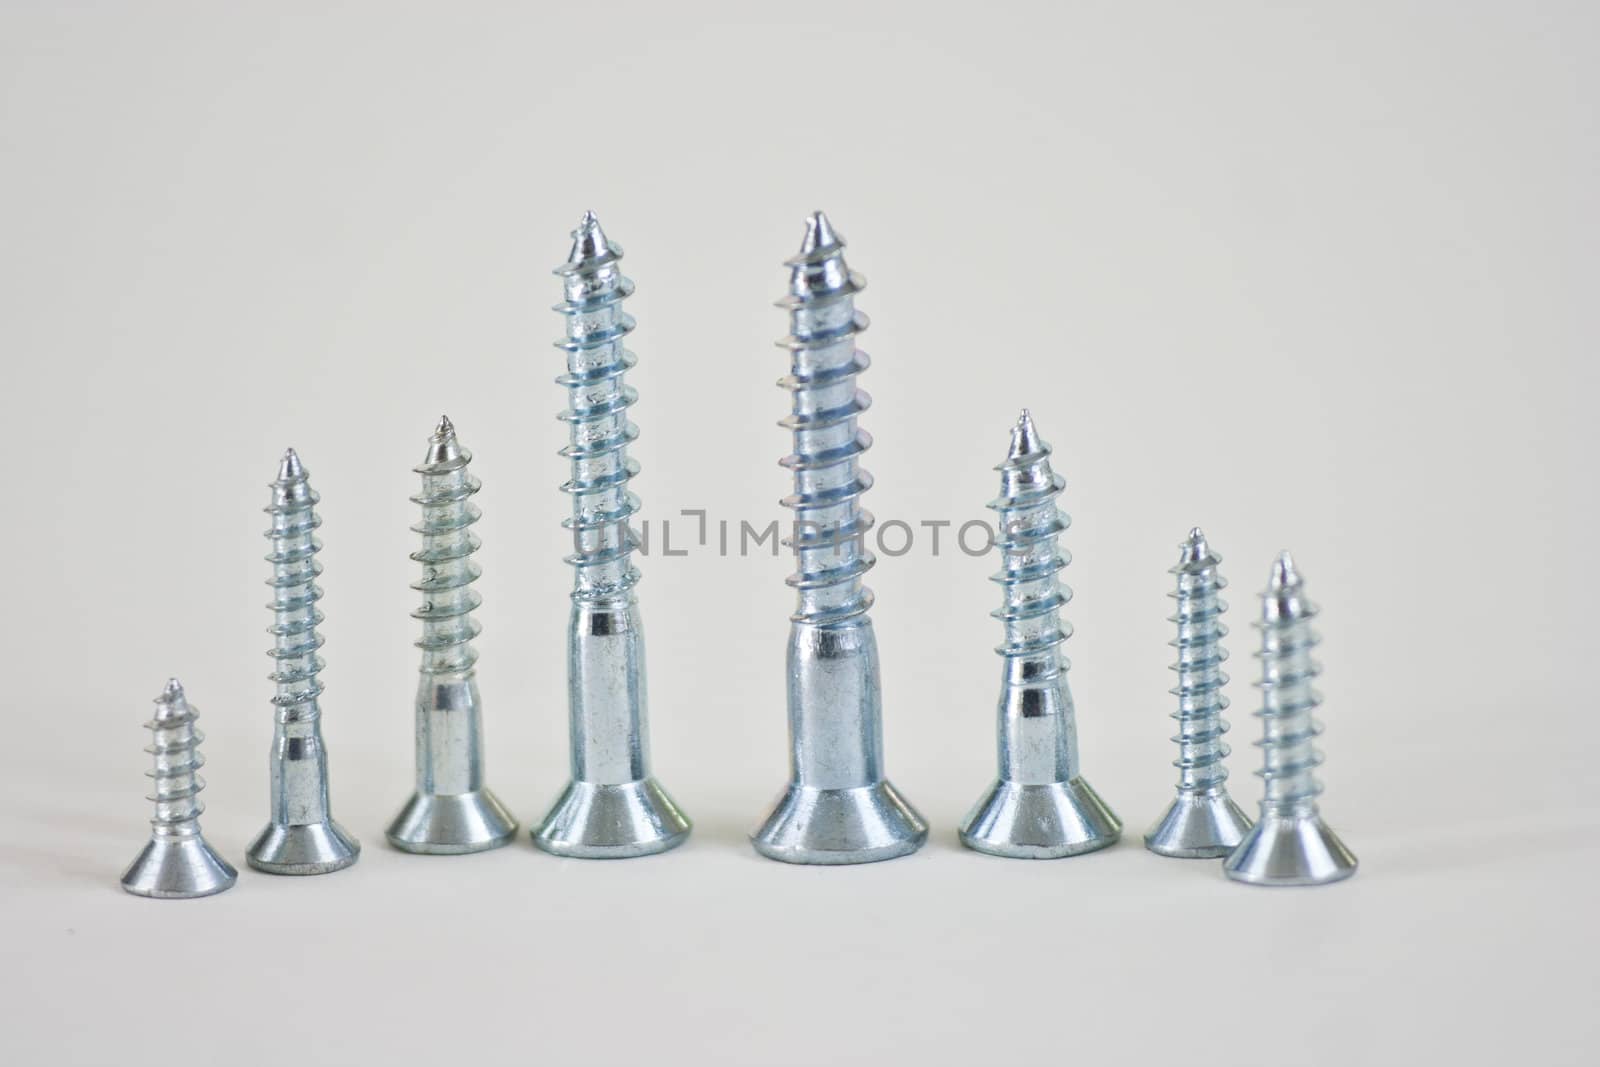 Different sizes of screws lined up in desending order on a white background.